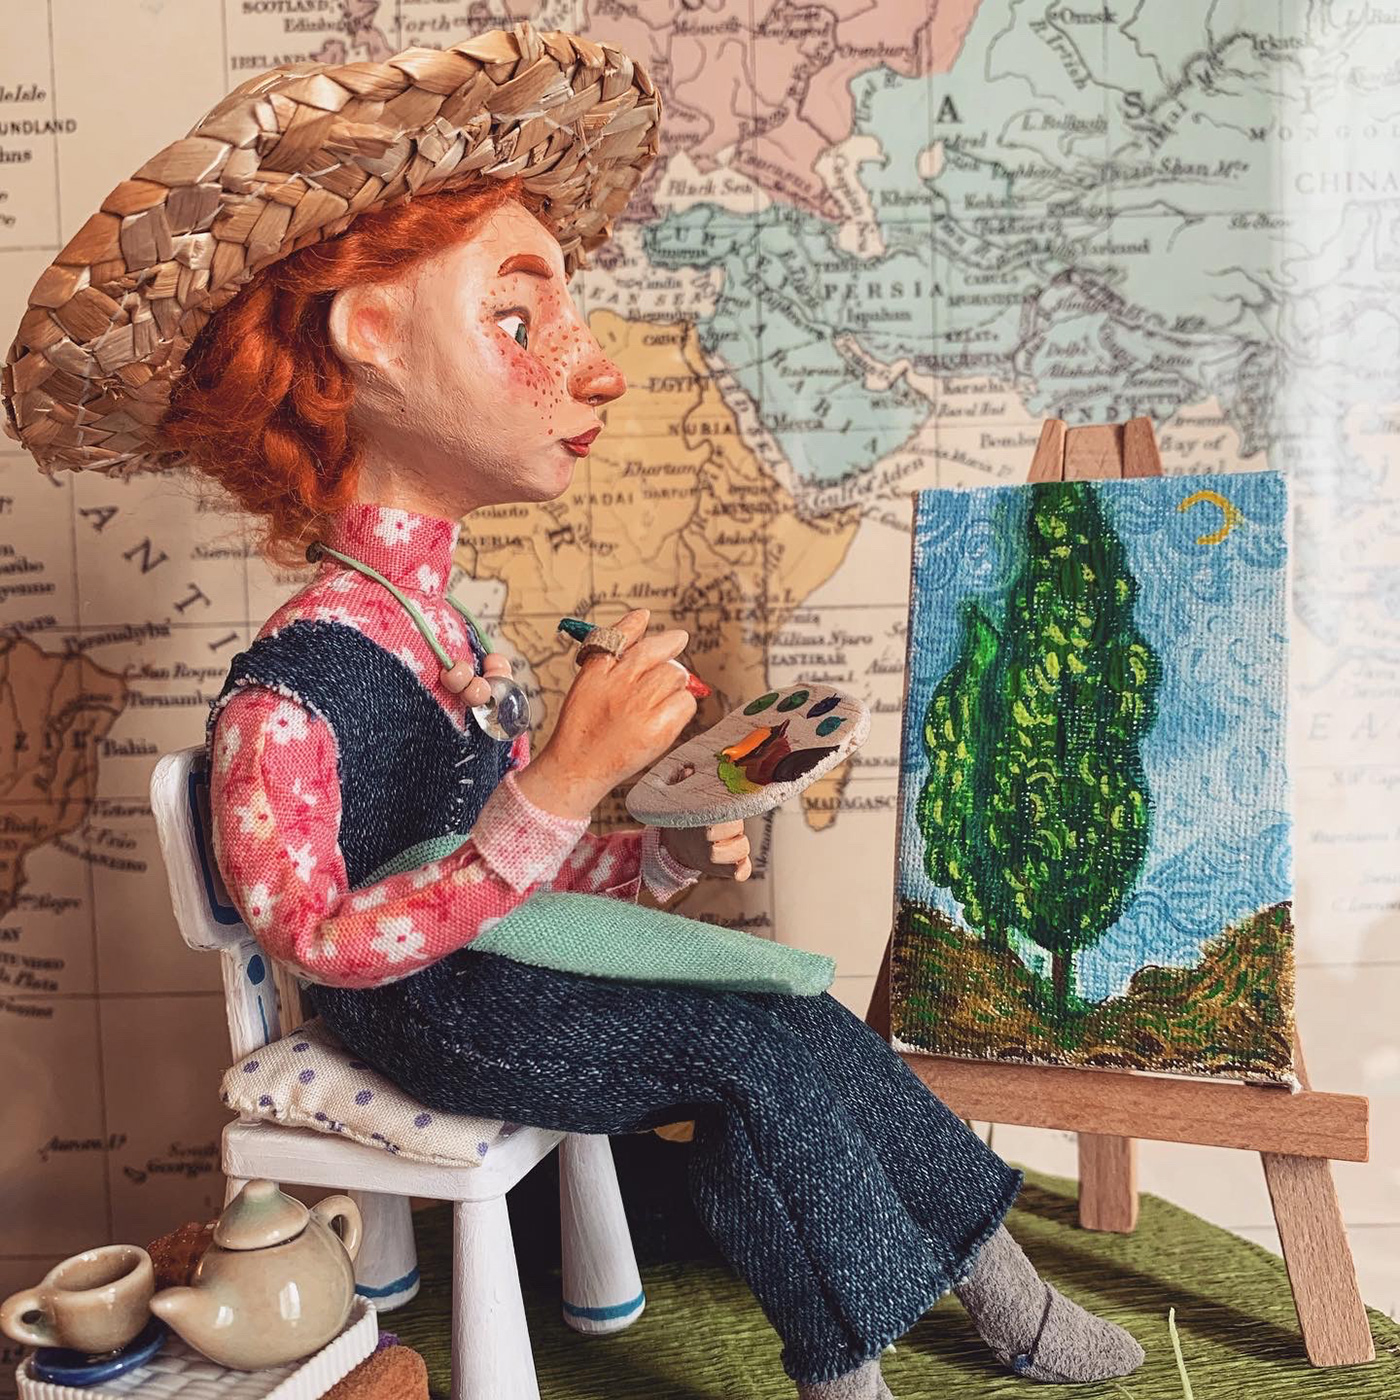 art doll Character design  collectible figure Interior Art Toy Ooal Doll painter starry night van gogh